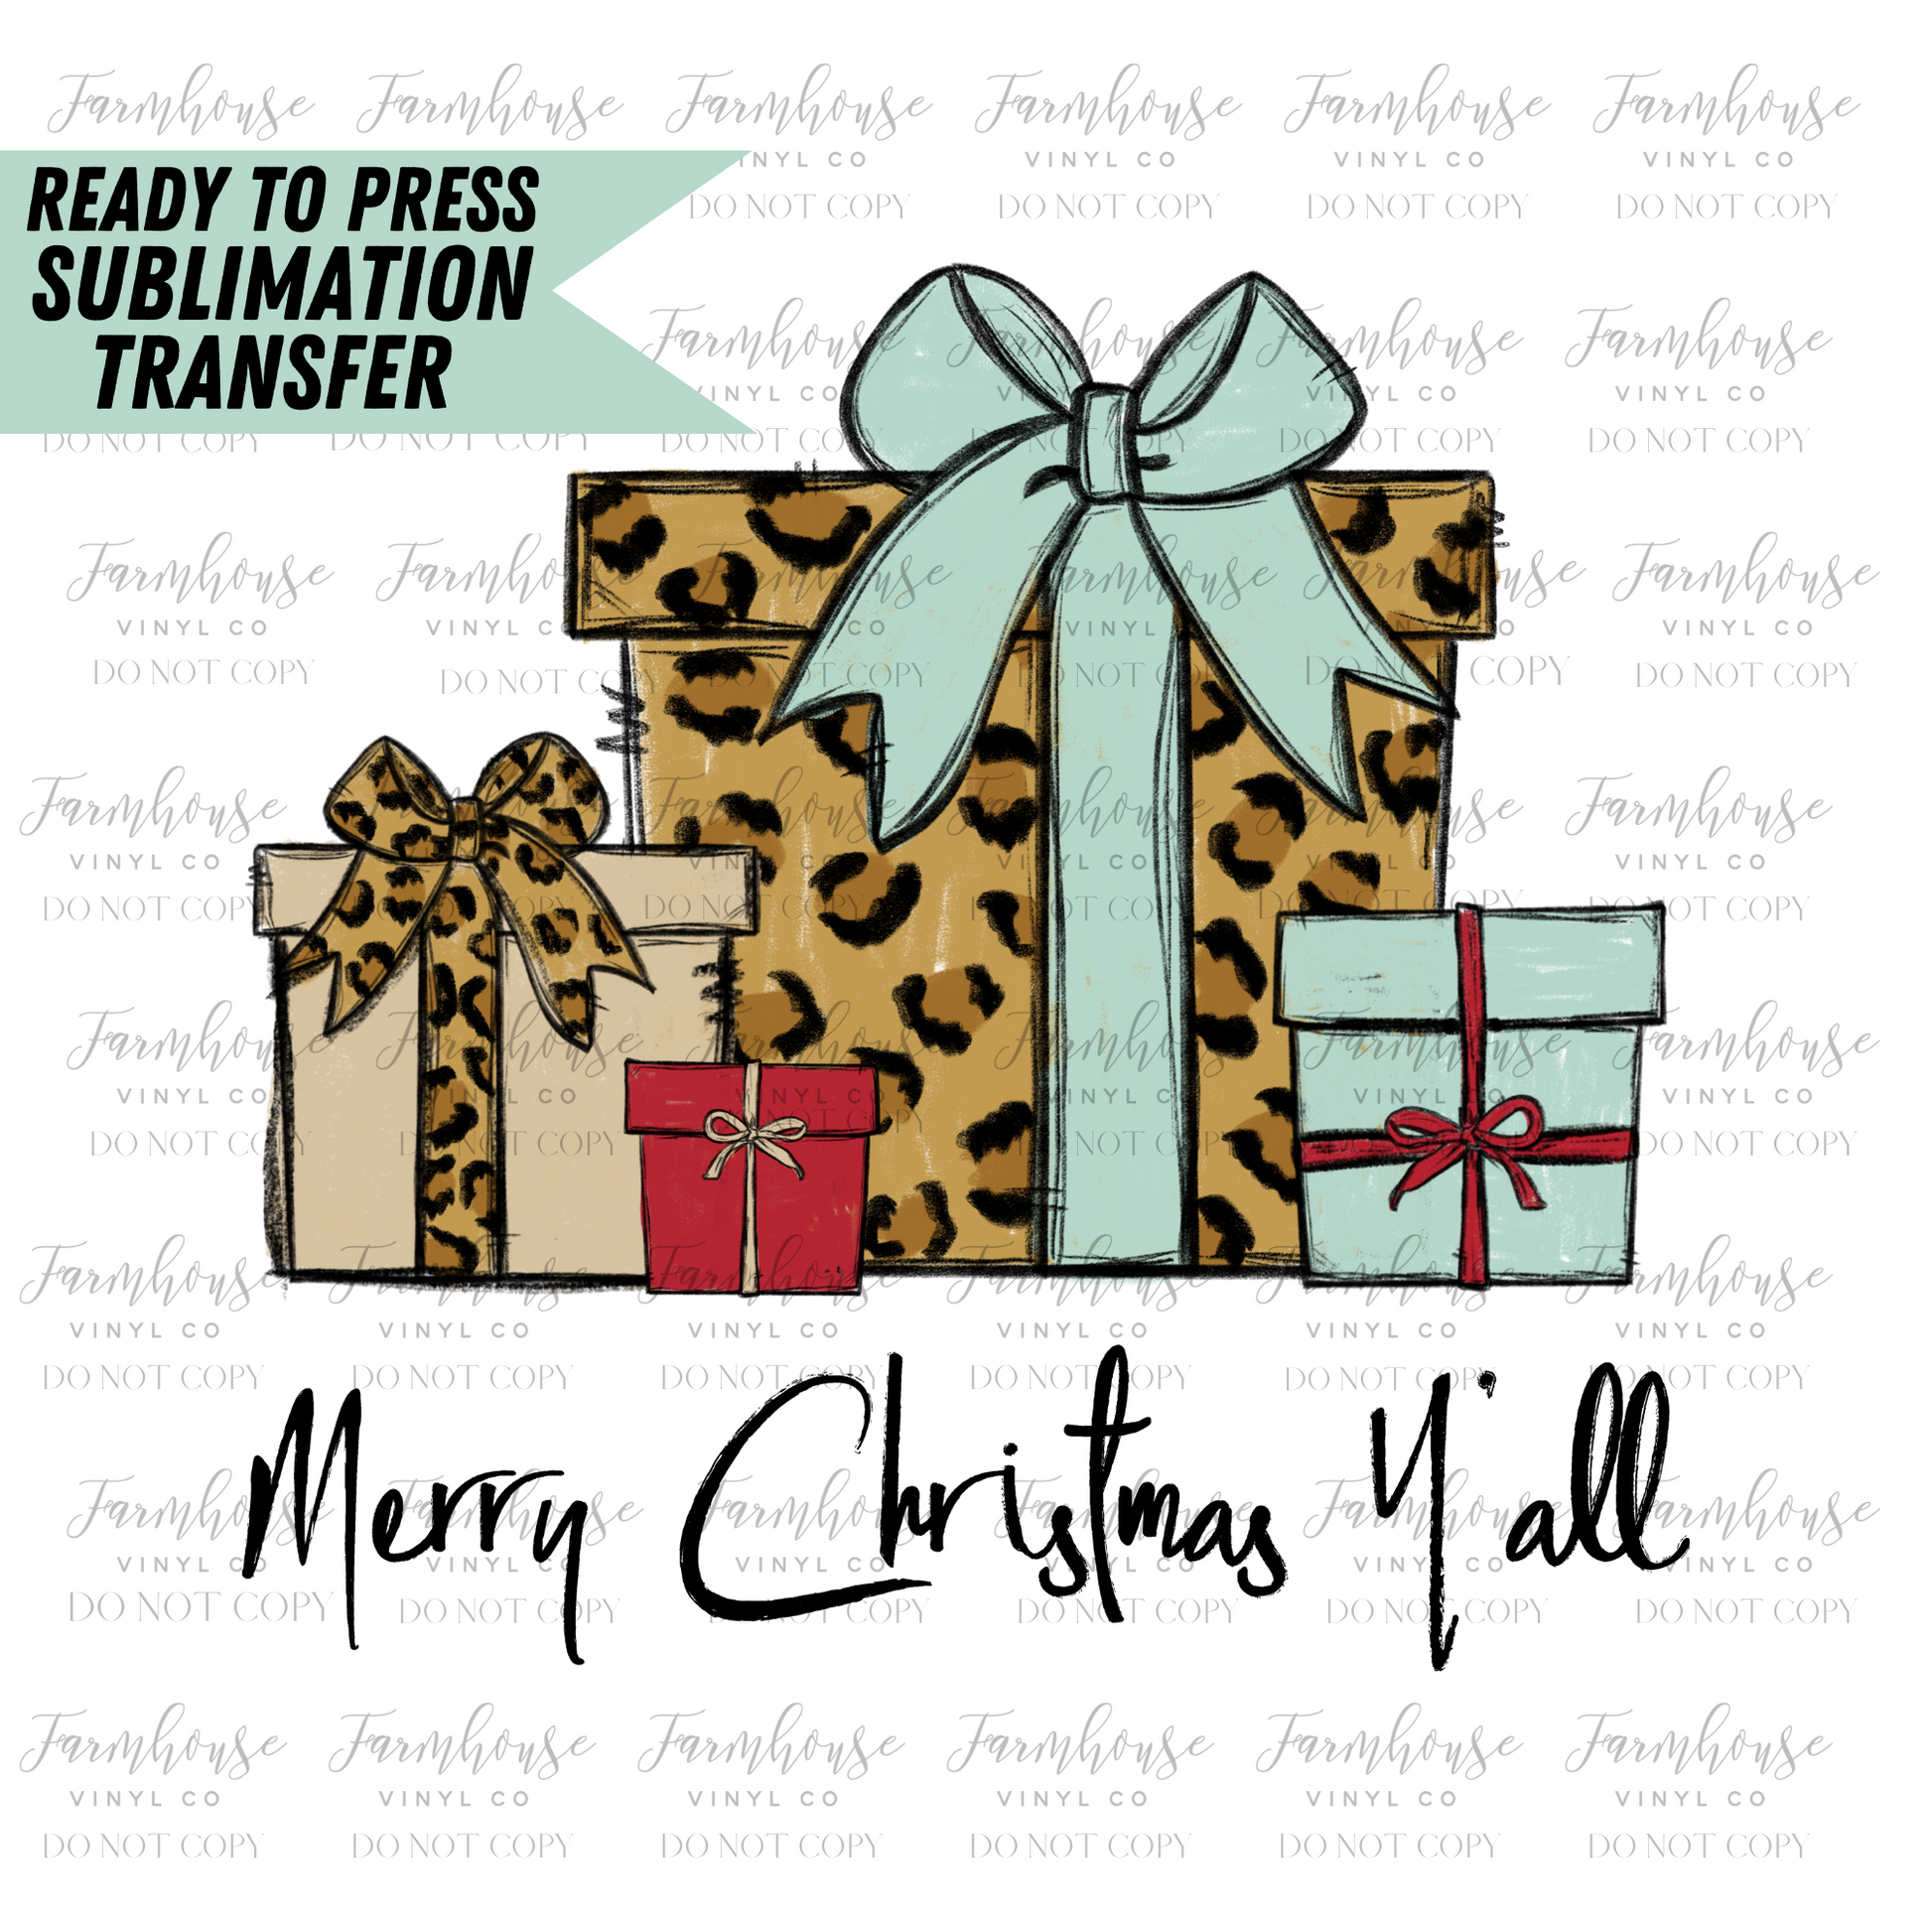 Merry Christmas Yall Leopard Christmas Gifts Ready To Press Sublimation Transfer - Farmhouse Vinyl Co